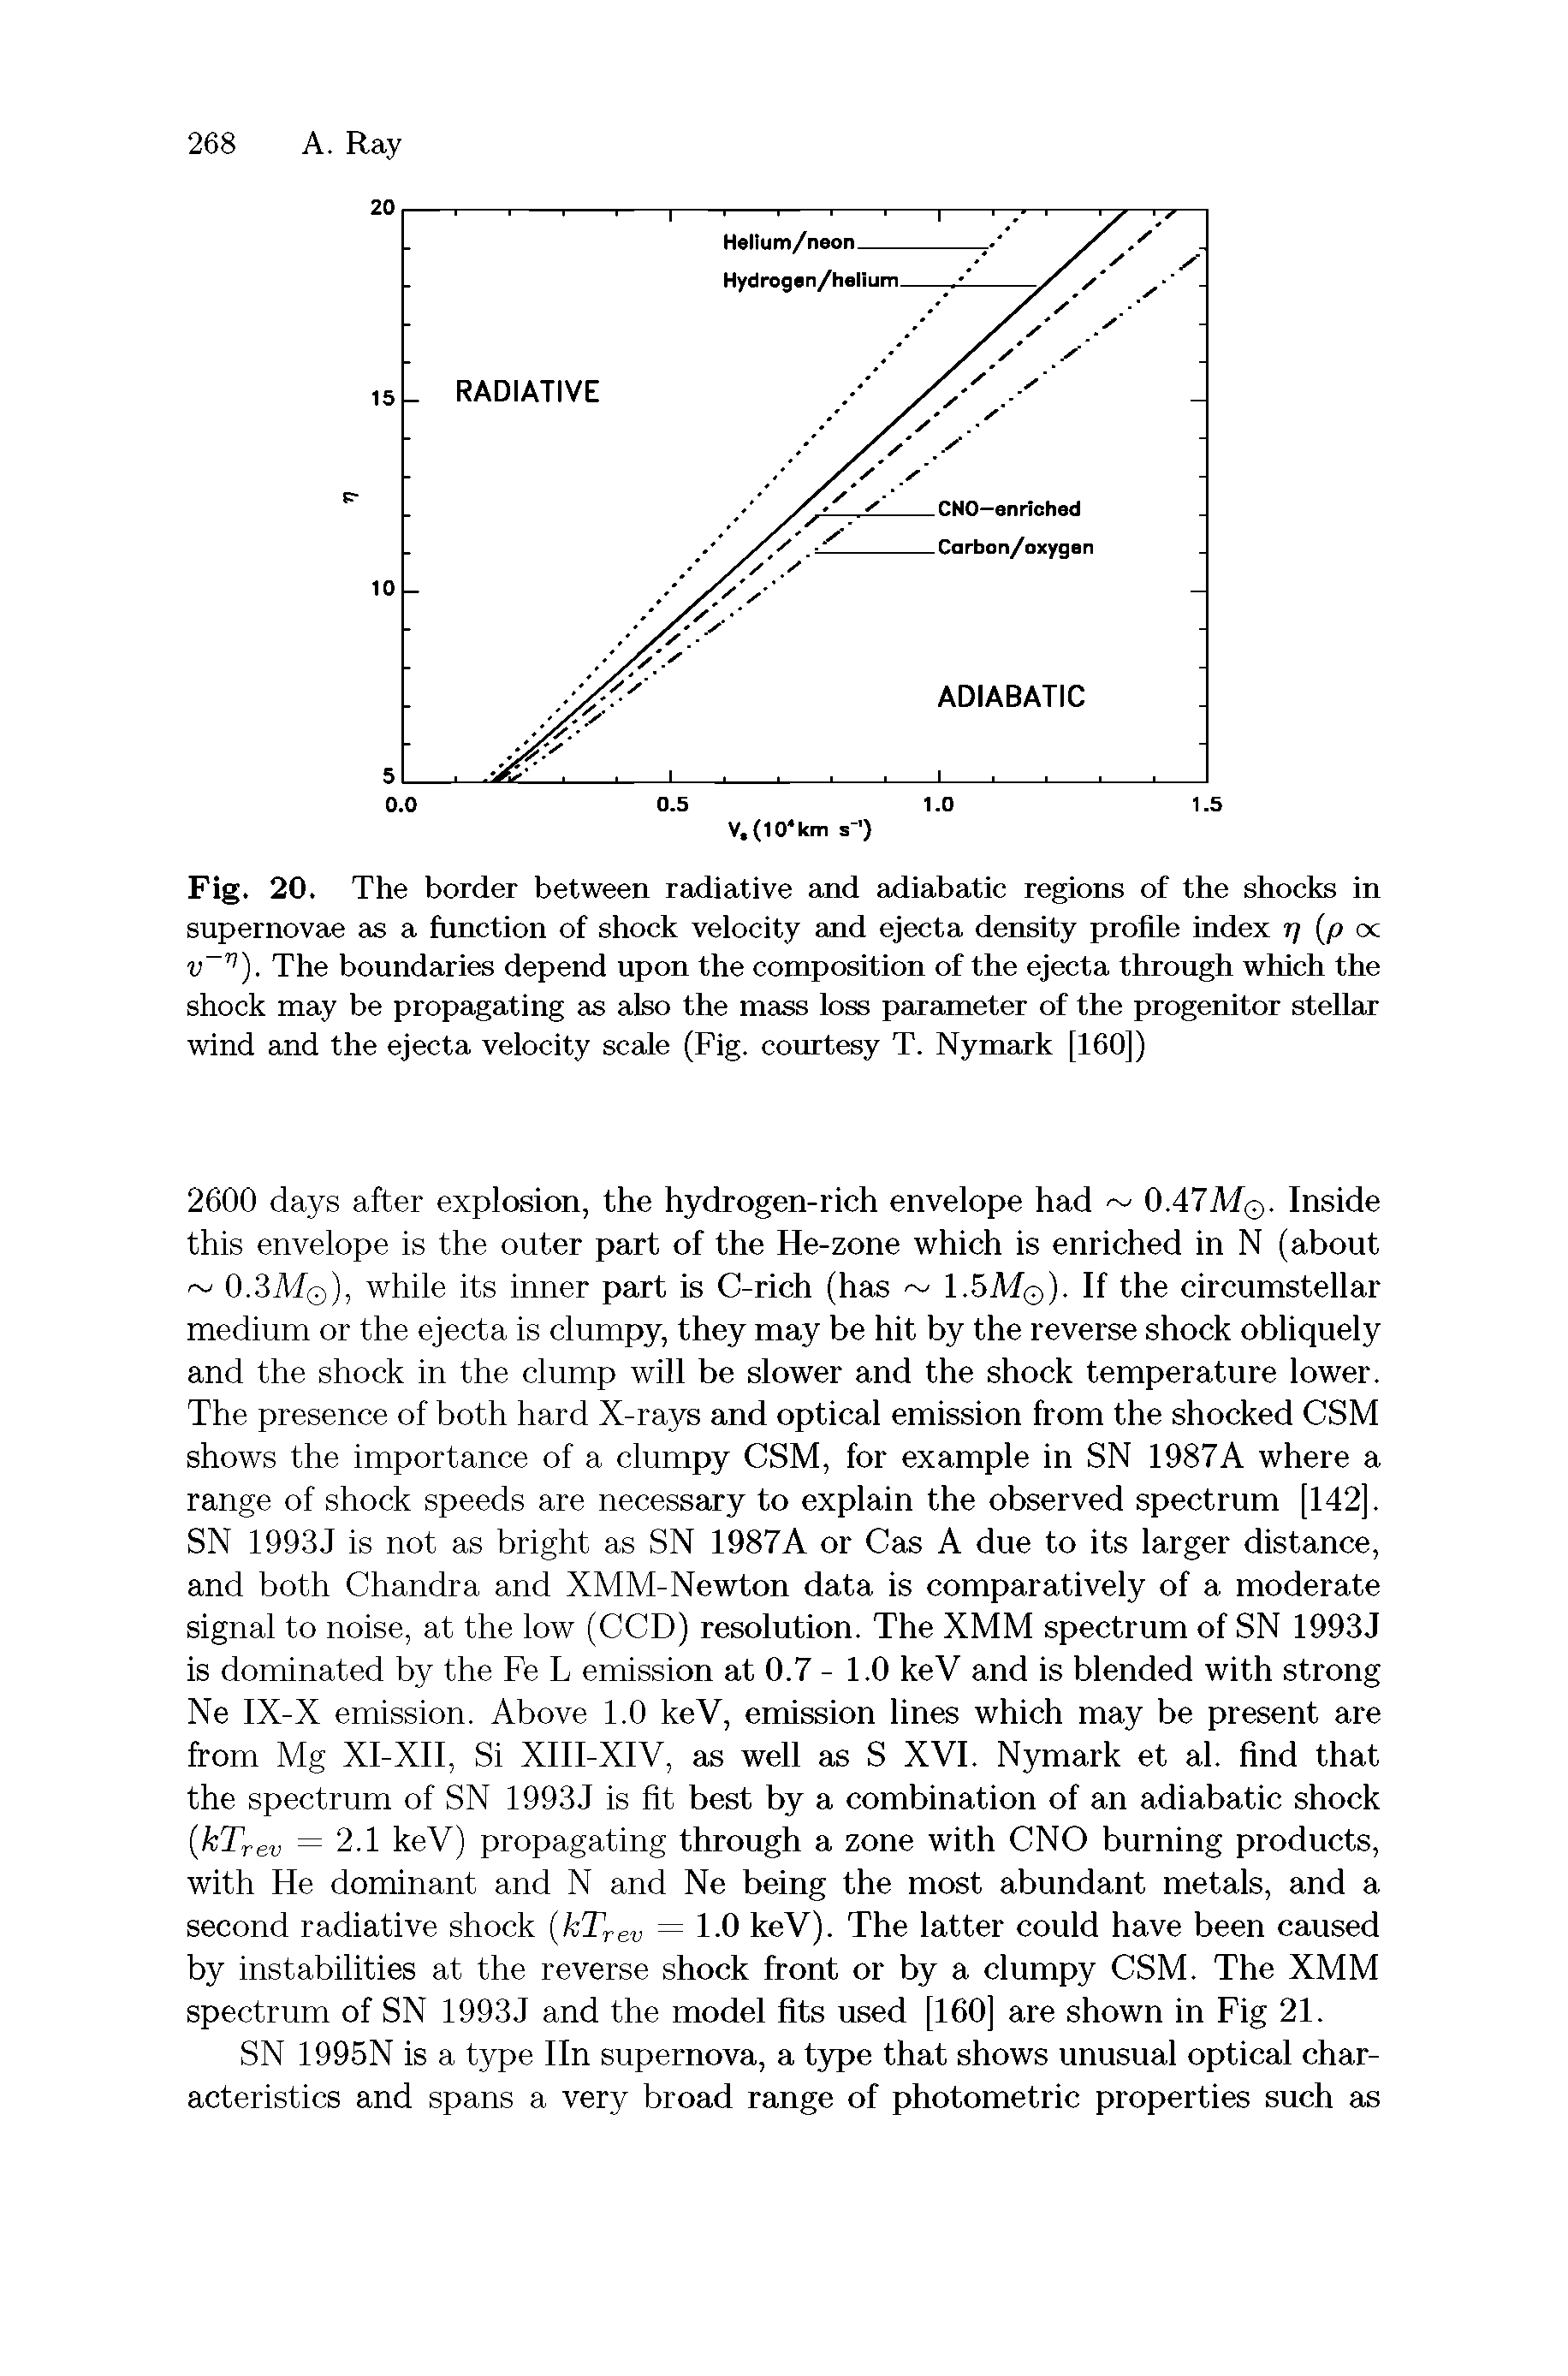 Fig. 20. The border between radiative and adiabatic regions of the shocks in supernovae as a function of shock velocity and ejecta density profile index r] (p oc v v j. The boundaries depend upon the composition of the ejecta through which the shock may be propagating as also the mass loss parameter of the progenitor stellar wind and the ejecta velocity scale (Fig. courtesy T. Nymark [160])...